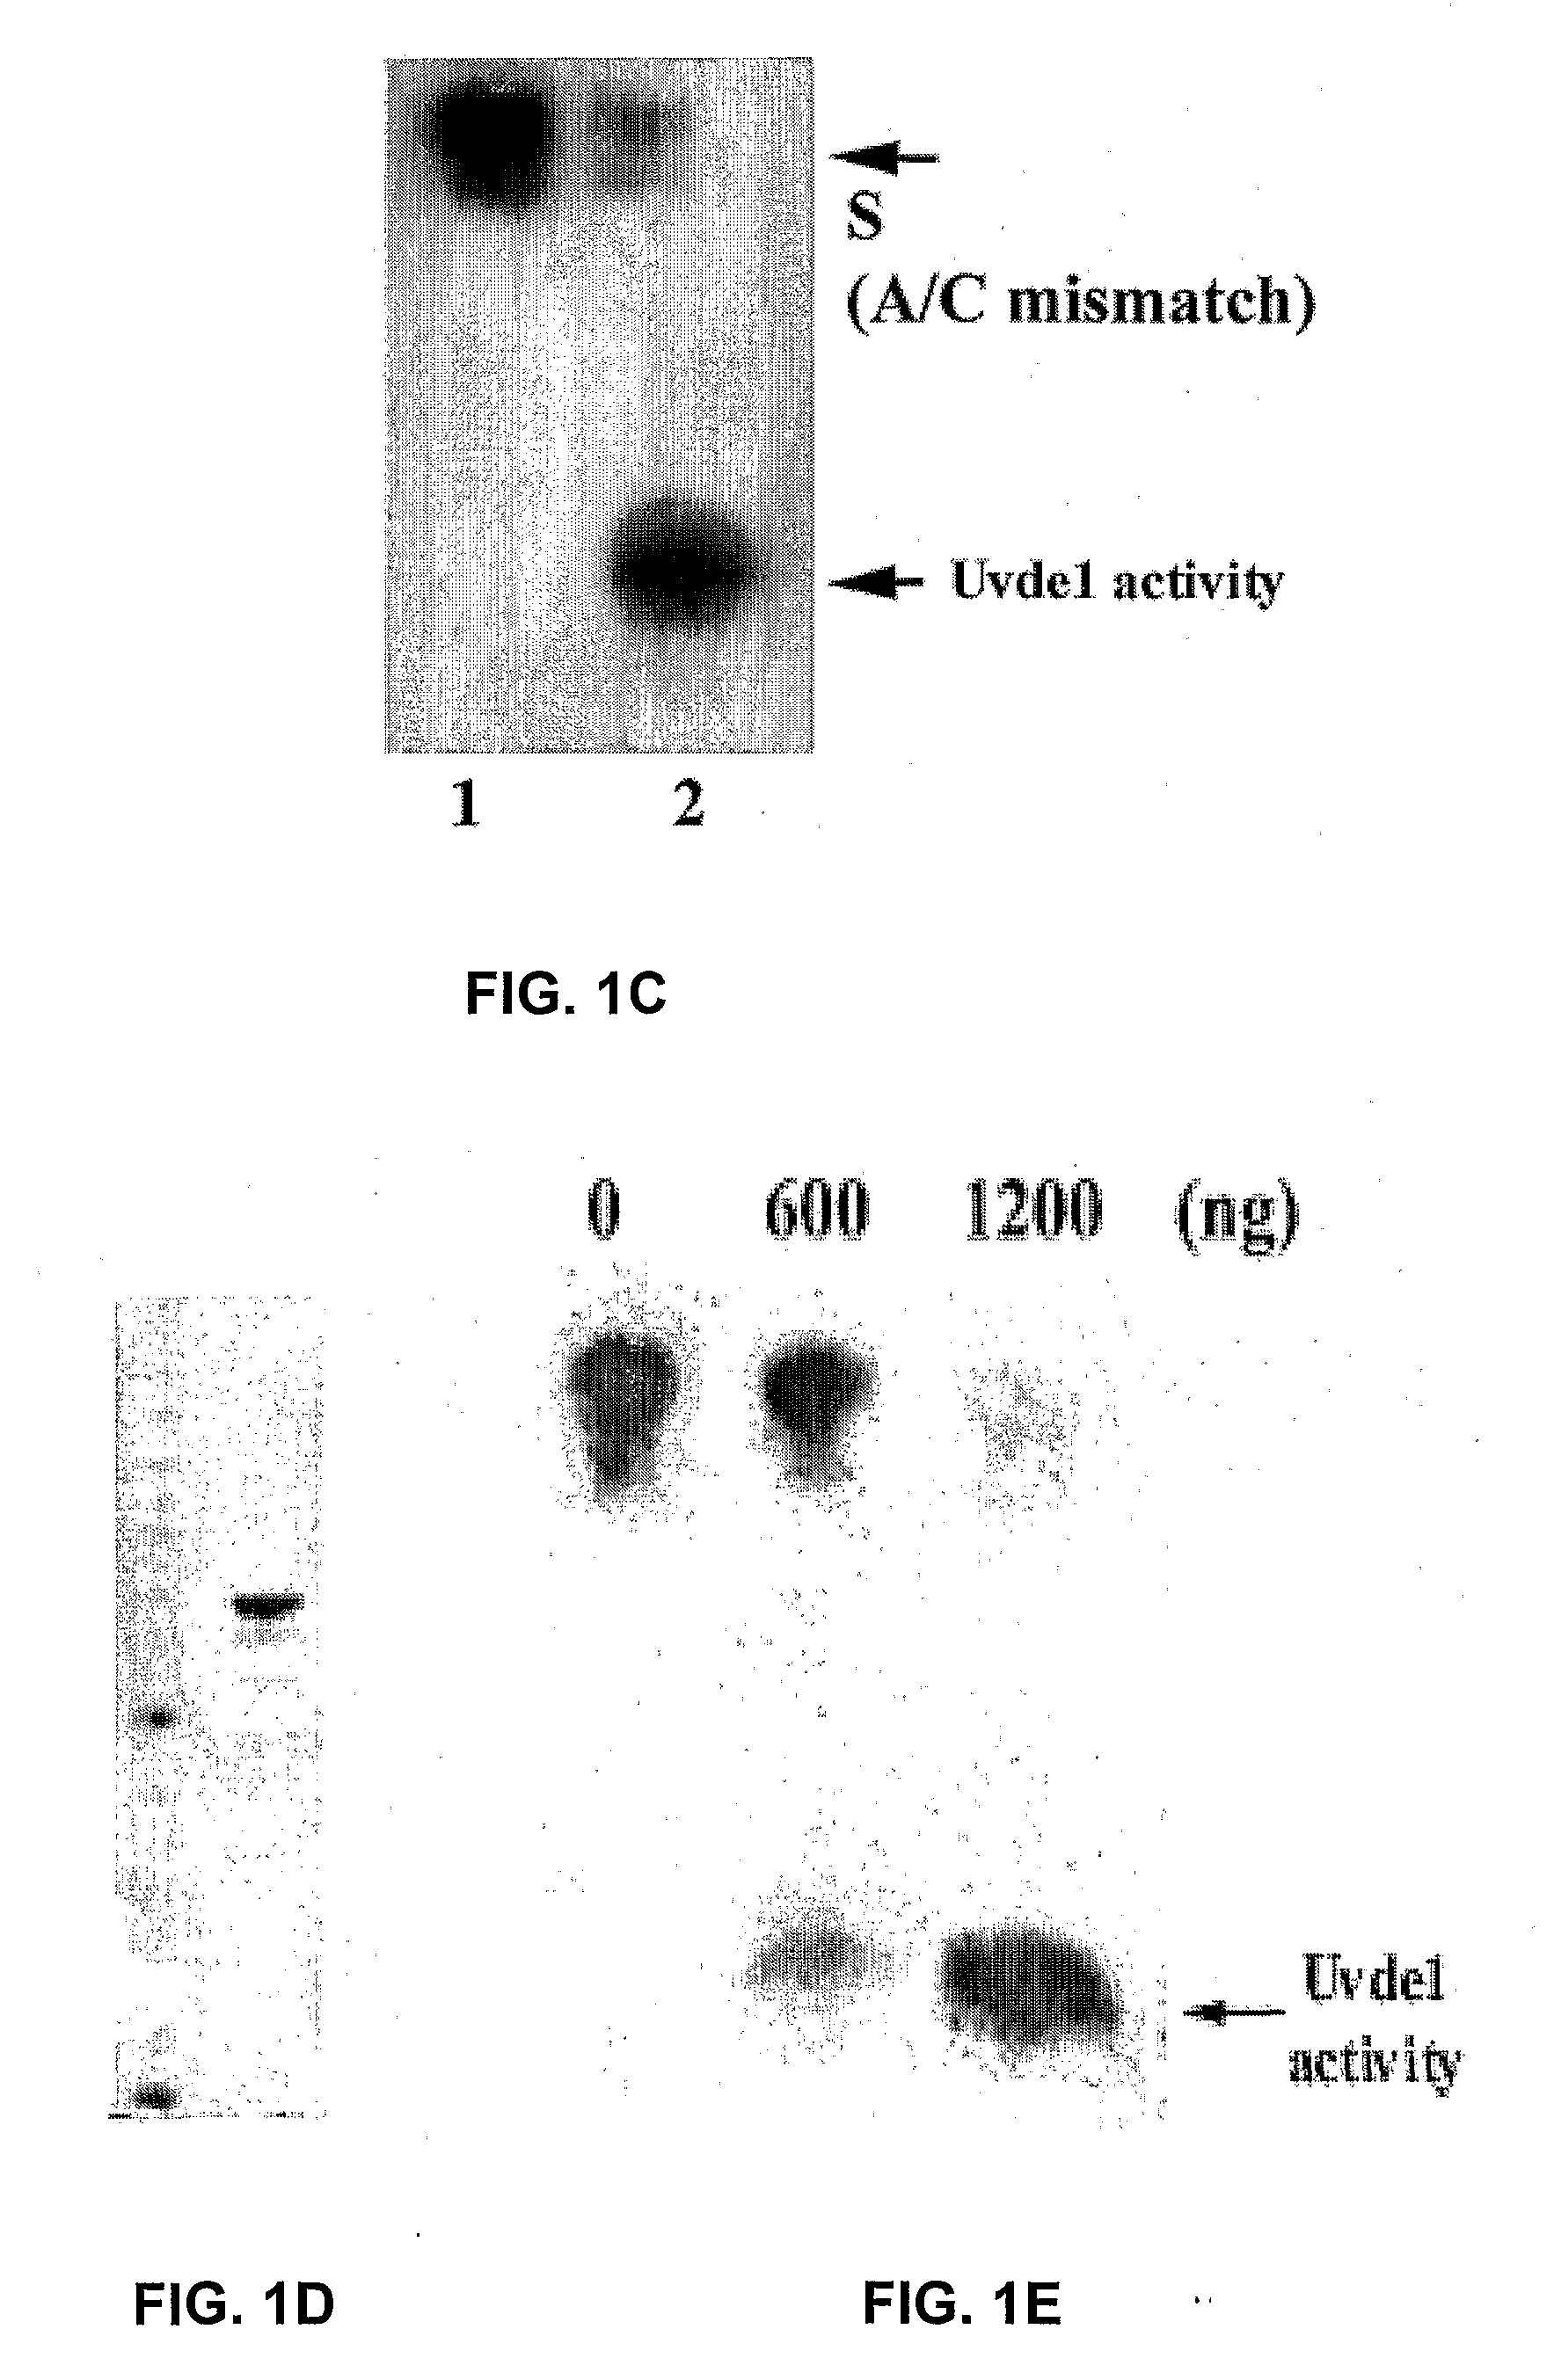 Re-engineered UV damage endonuclease, compositions and methods